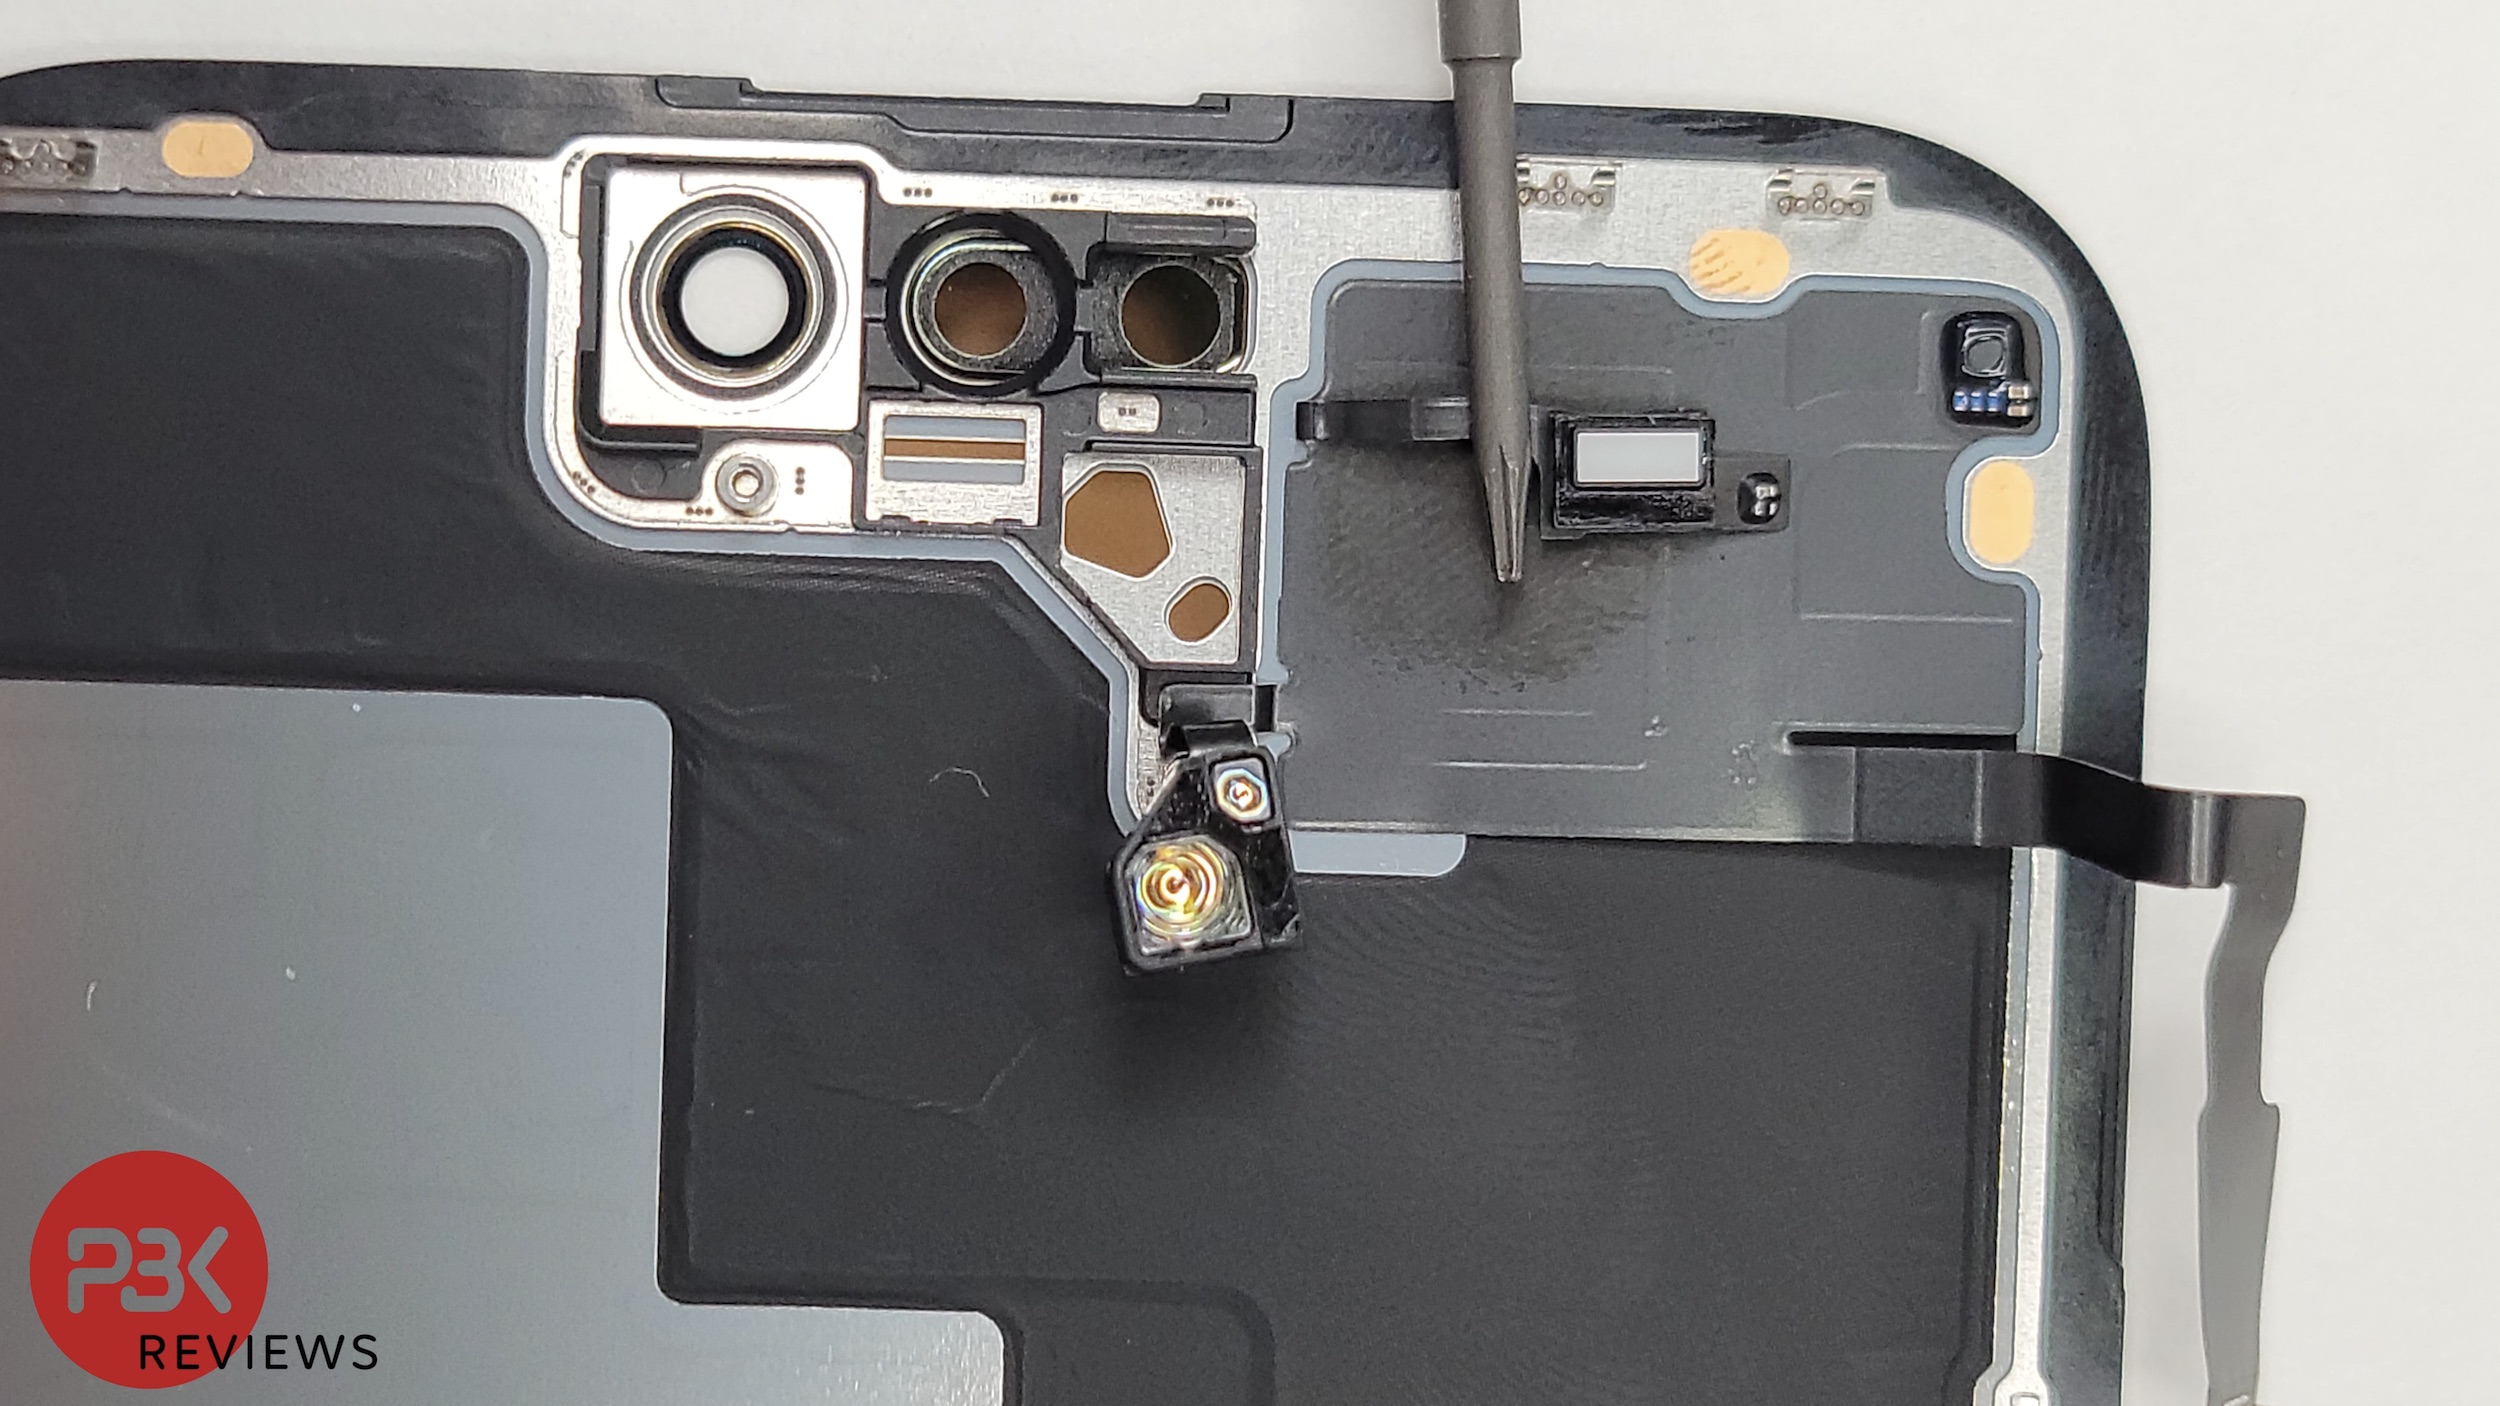 Early iPhone 14 Pro Max teardown gives us a first look at the phone's internal components.